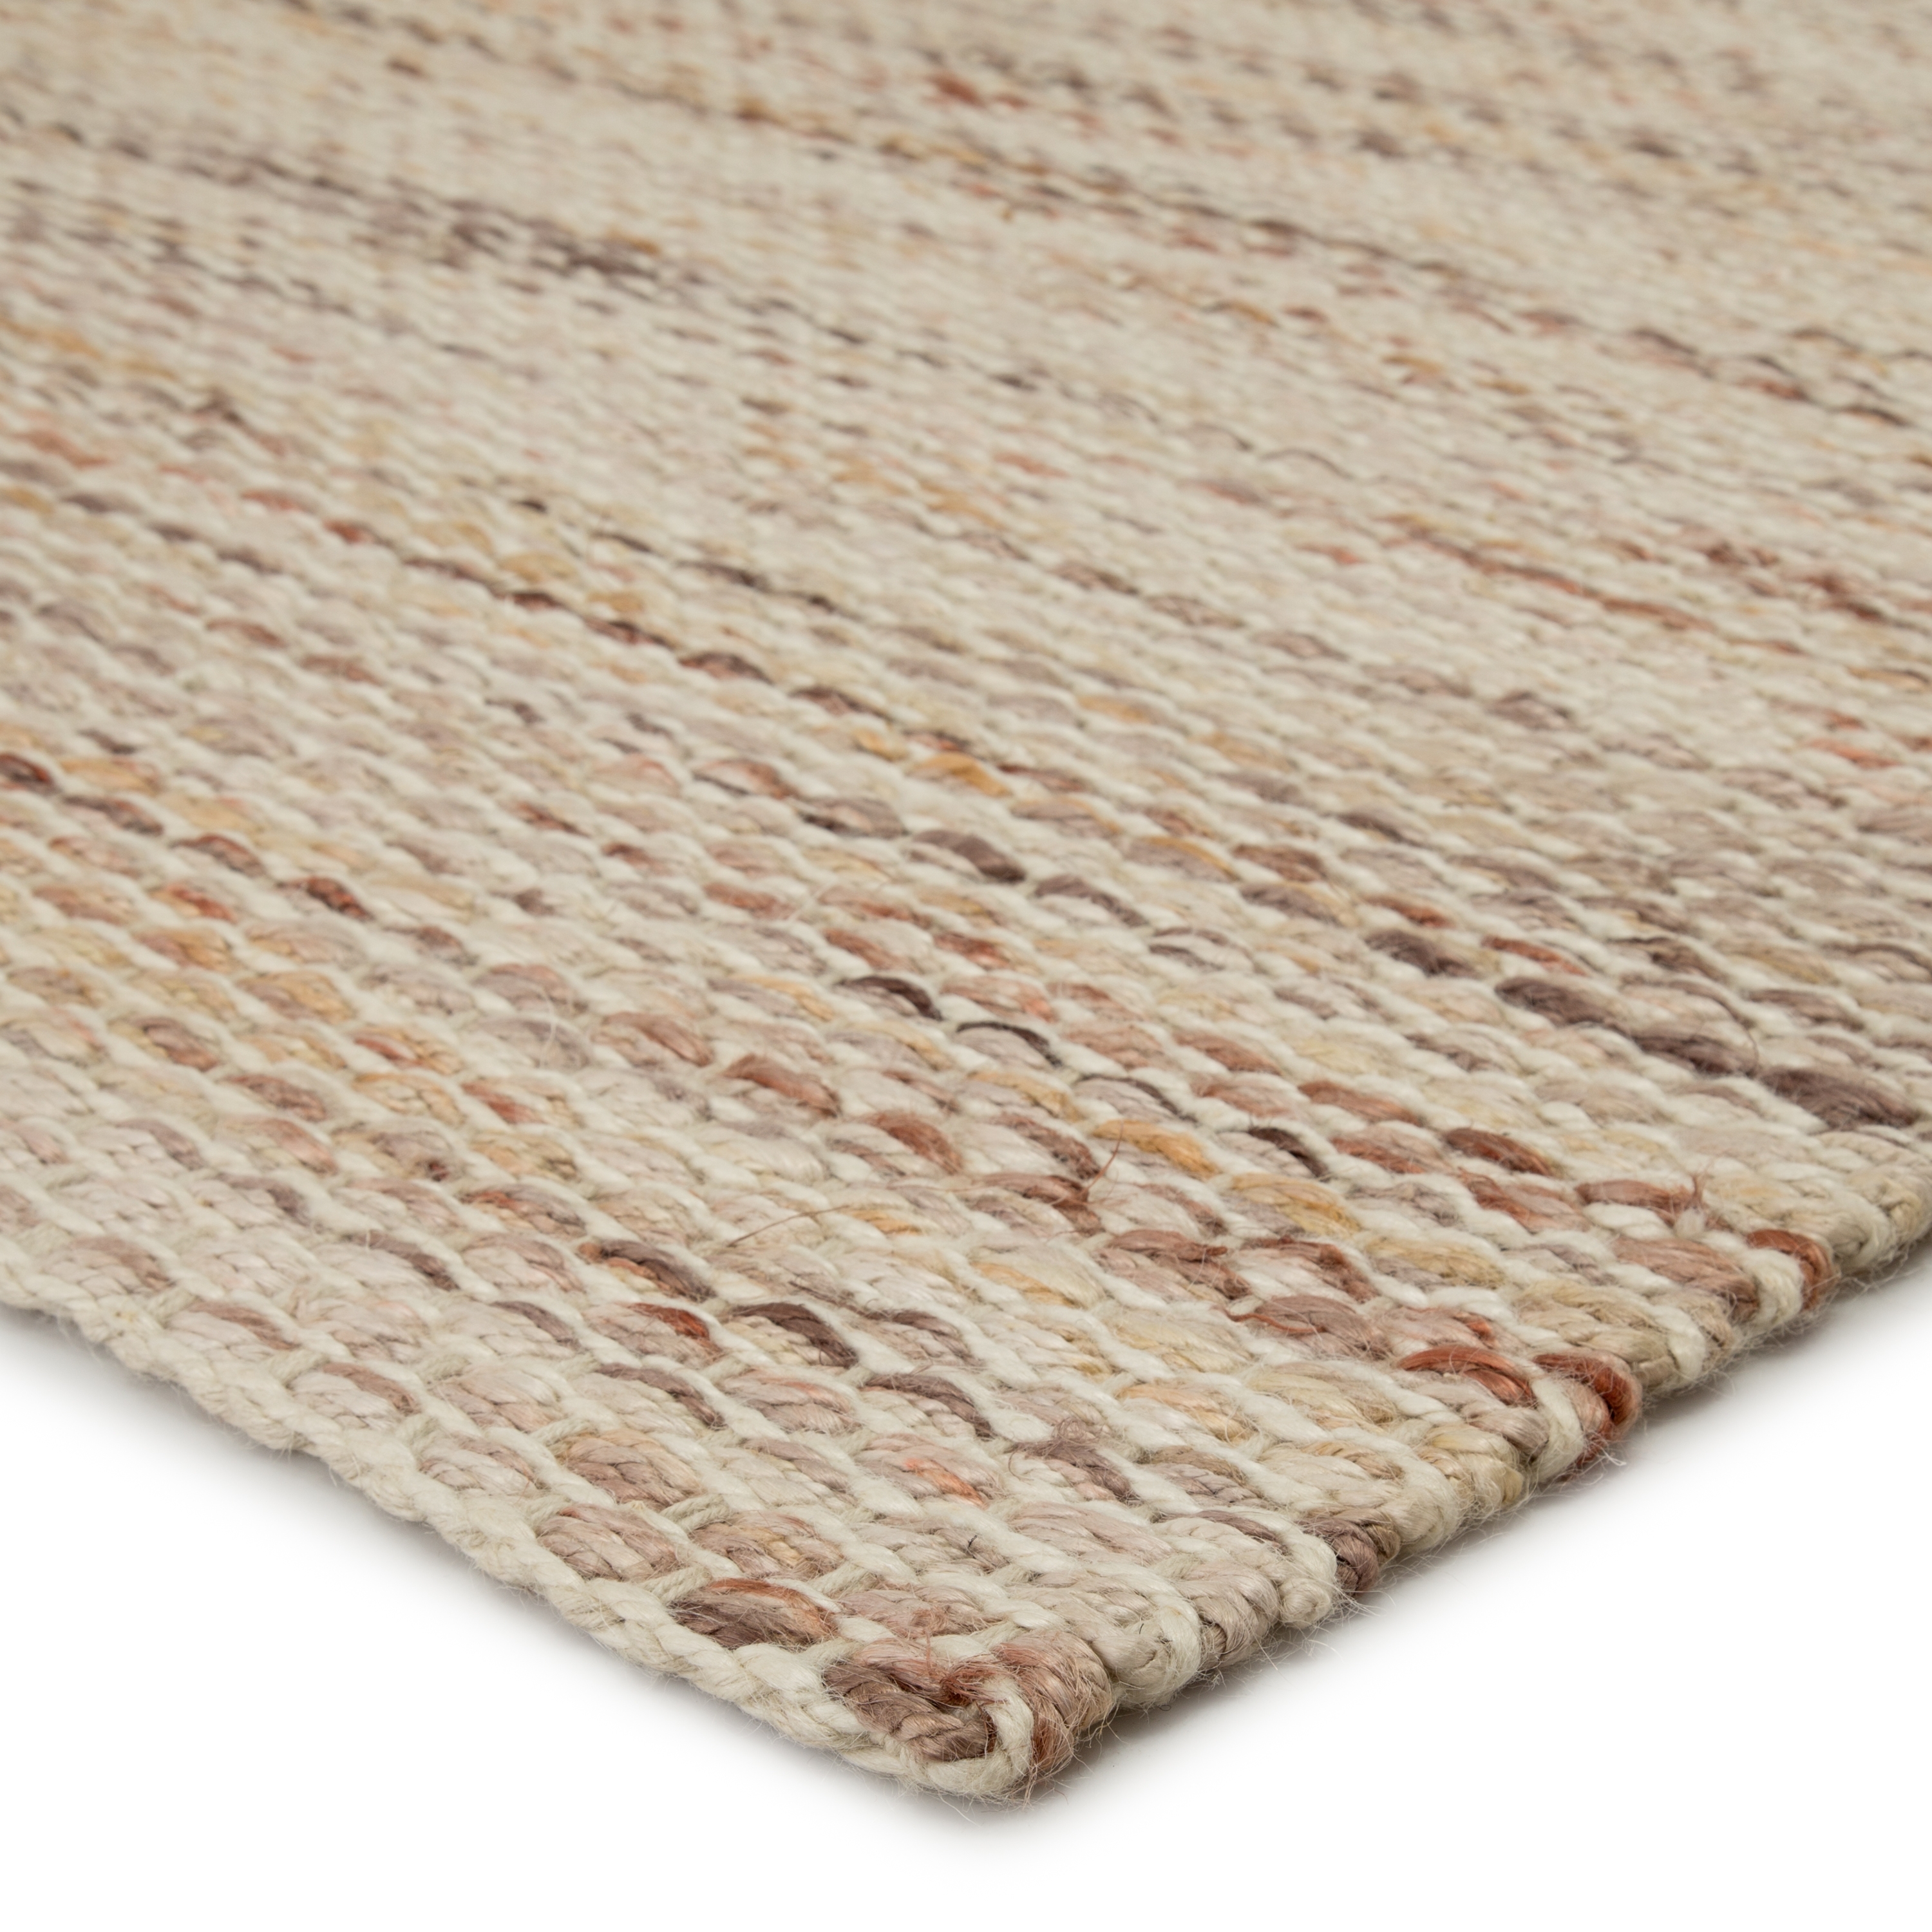 Cirra Natural Solid Ivory/ Terra Cotta Area Rug (9'X12') - Image 1